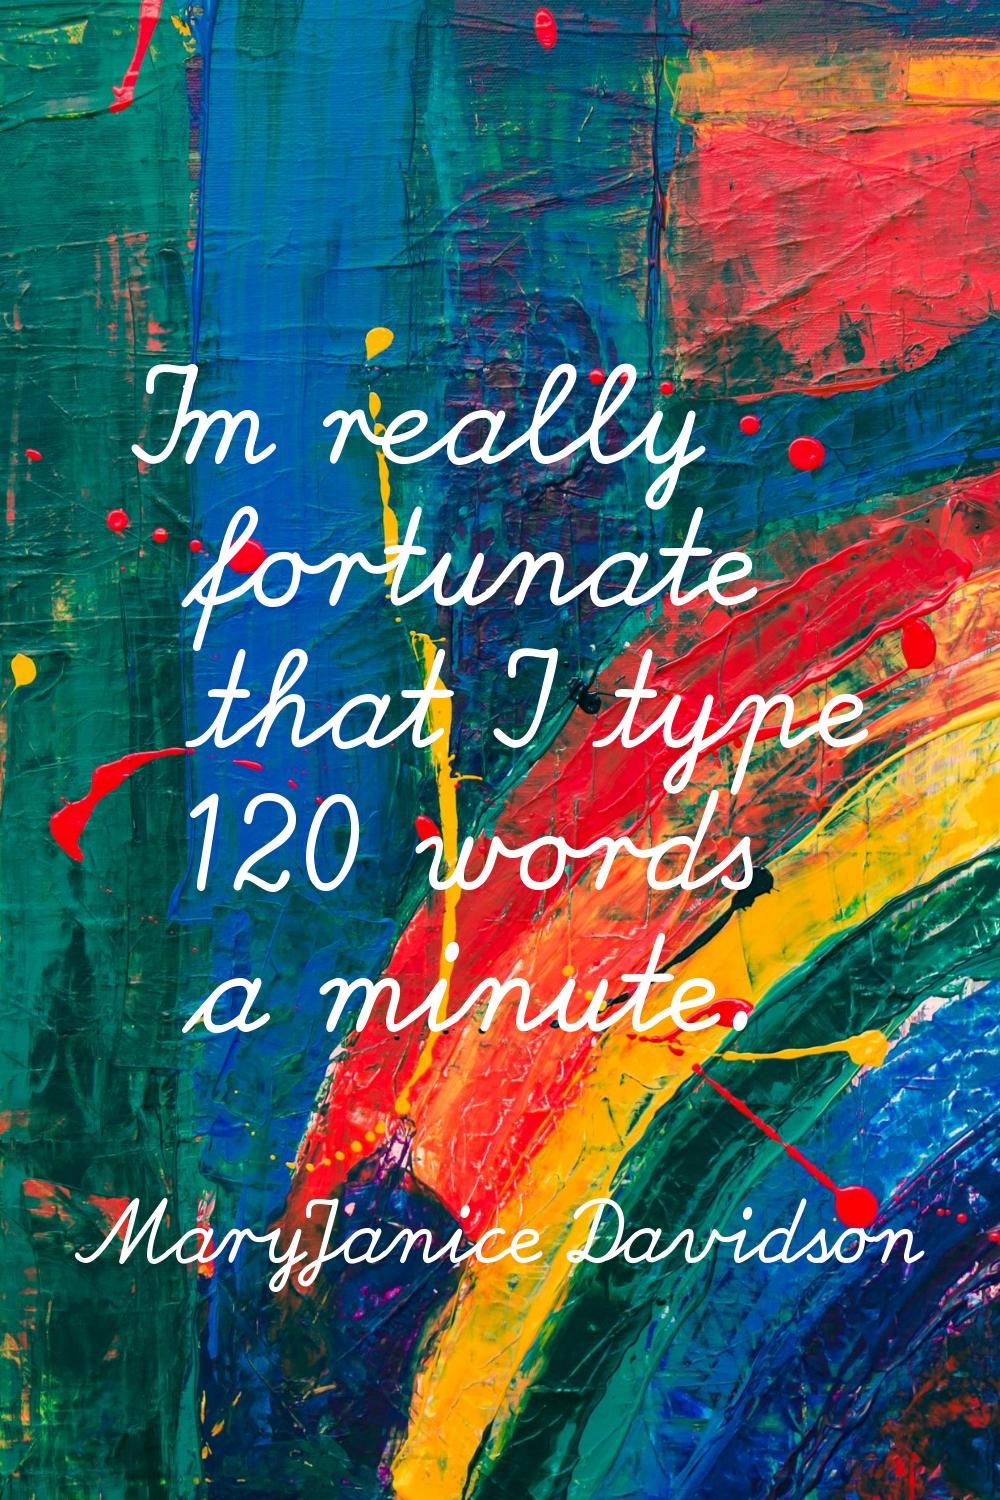 I'm really fortunate that I type 120 words a minute.